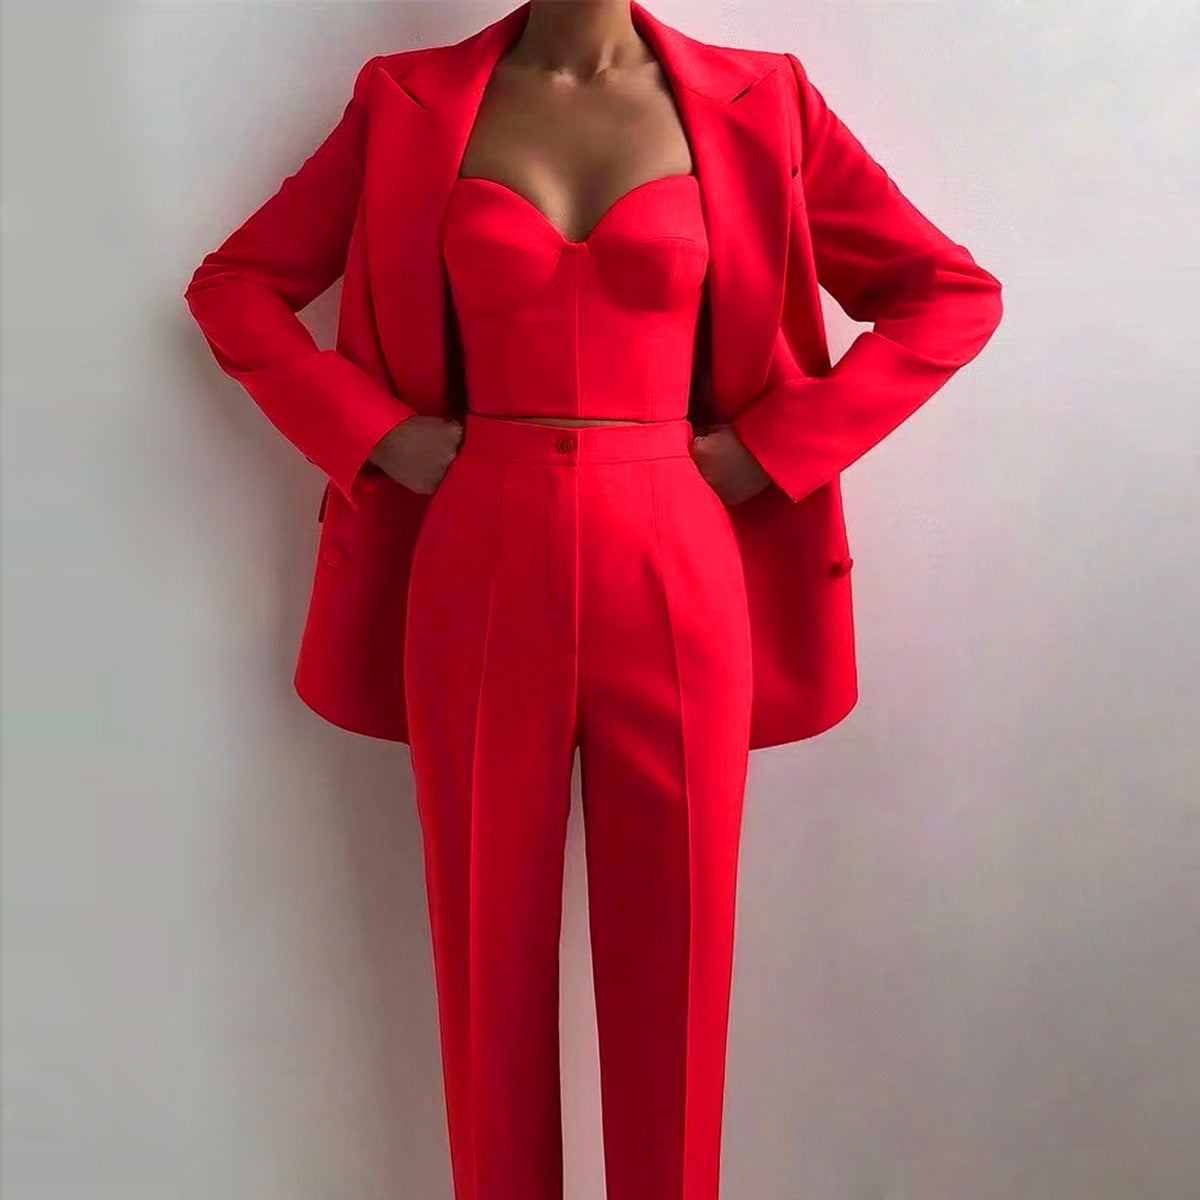 Fall Fits | Red Elegance Blazer Outfit 3-piece set